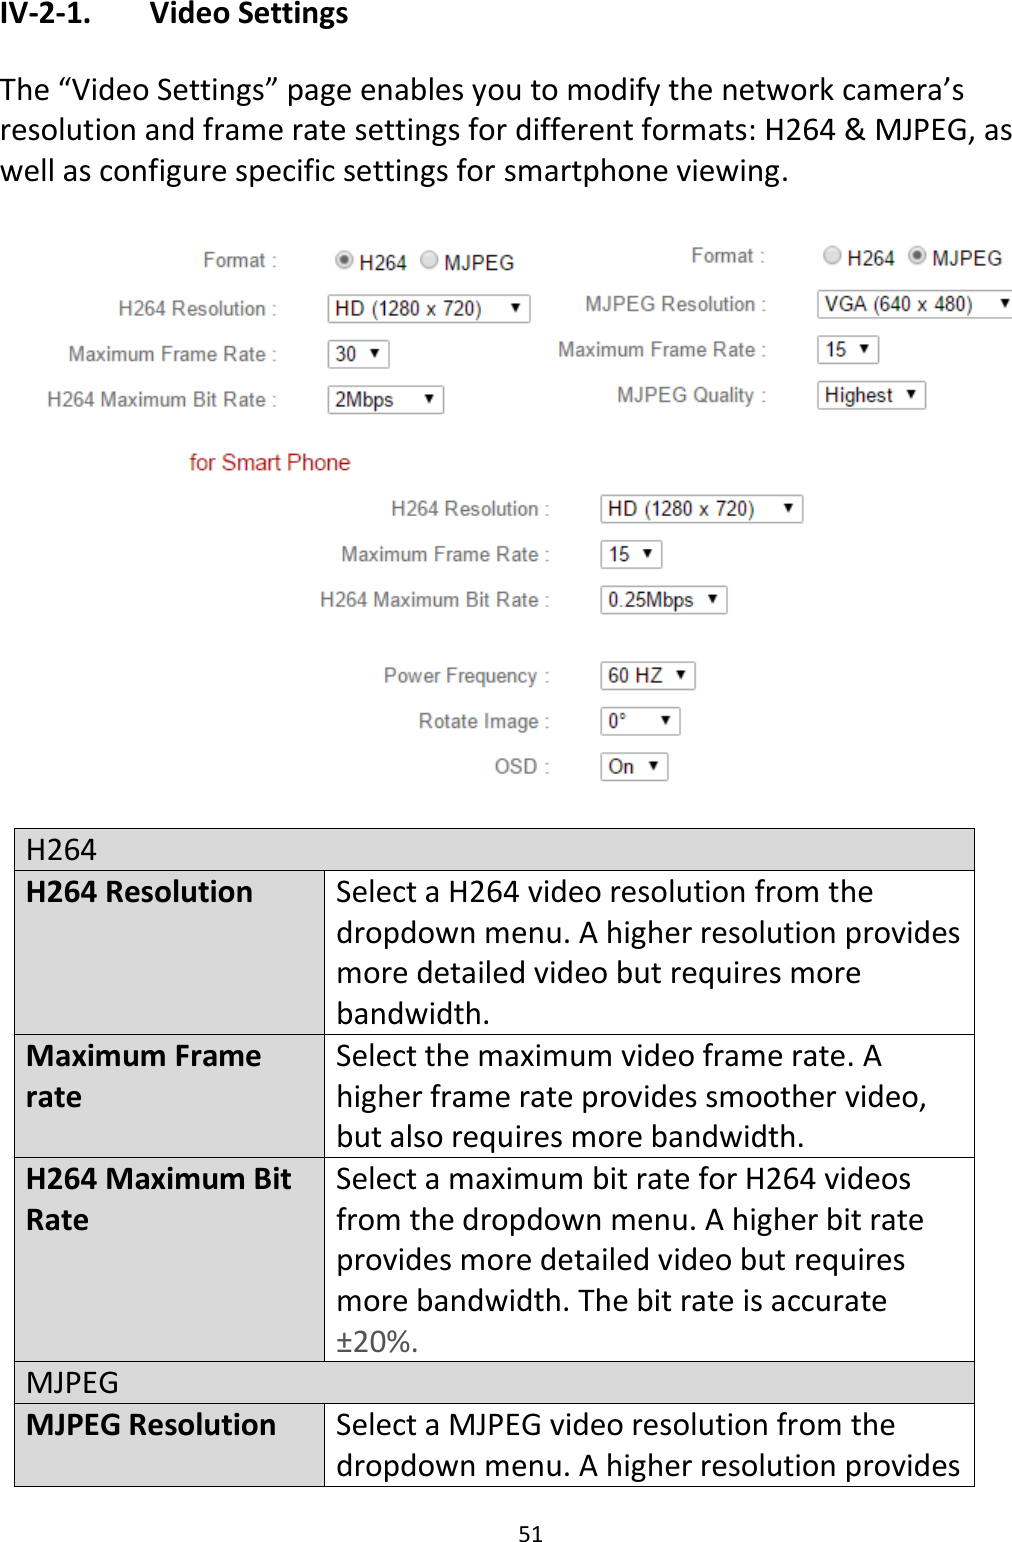 51  IV-2-1.   Video Settings  The “Video Settings” page enables you to modify the network camera’s resolution and frame rate settings for different formats: H264 &amp; MJPEG, as well as configure specific settings for smartphone viewing.    H264 H264 Resolution Select a H264 video resolution from the dropdown menu. A higher resolution provides more detailed video but requires more bandwidth. Maximum Frame rate Select the maximum video frame rate. A higher frame rate provides smoother video, but also requires more bandwidth. H264 Maximum Bit Rate Select a maximum bit rate for H264 videos from the dropdown menu. A higher bit rate provides more detailed video but requires more bandwidth. The bit rate is accurate ±20%. MJPEG MJPEG Resolution Select a MJPEG video resolution from the dropdown menu. A higher resolution provides 